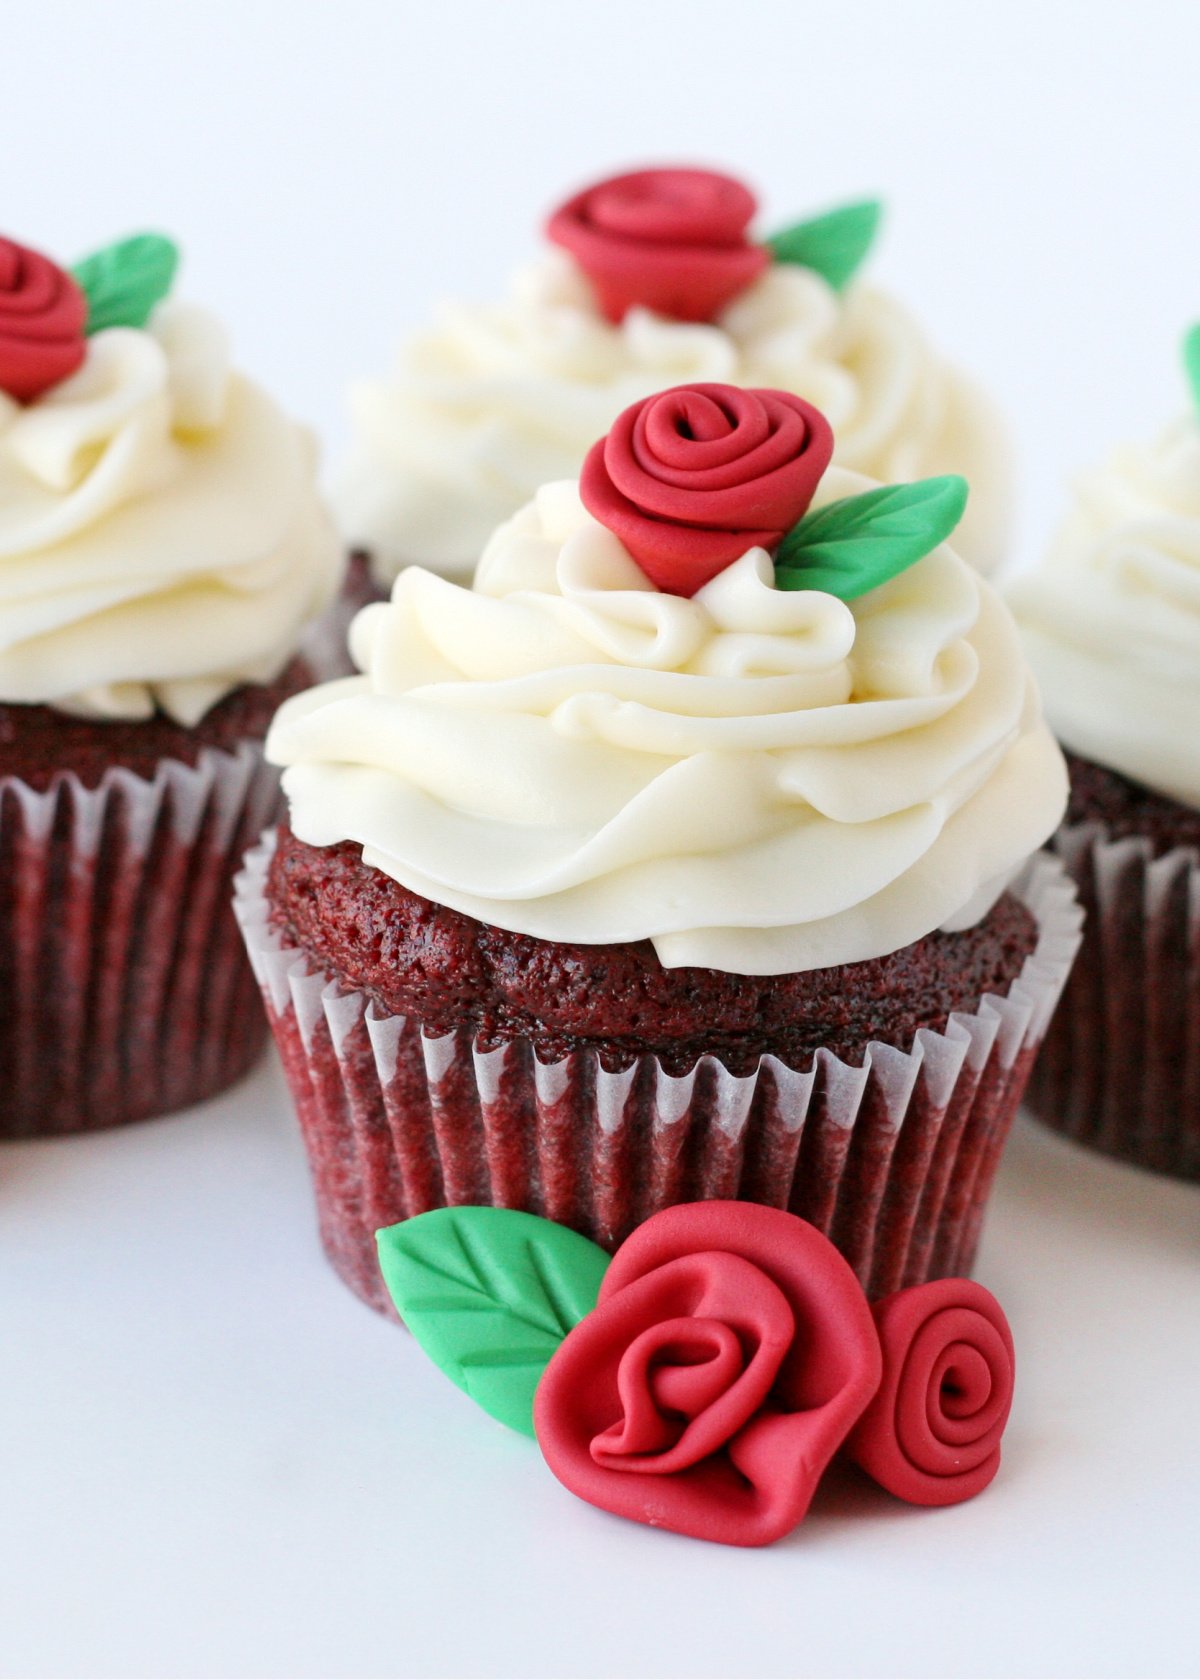 red velvet cupcakes on white background with red fondant roses